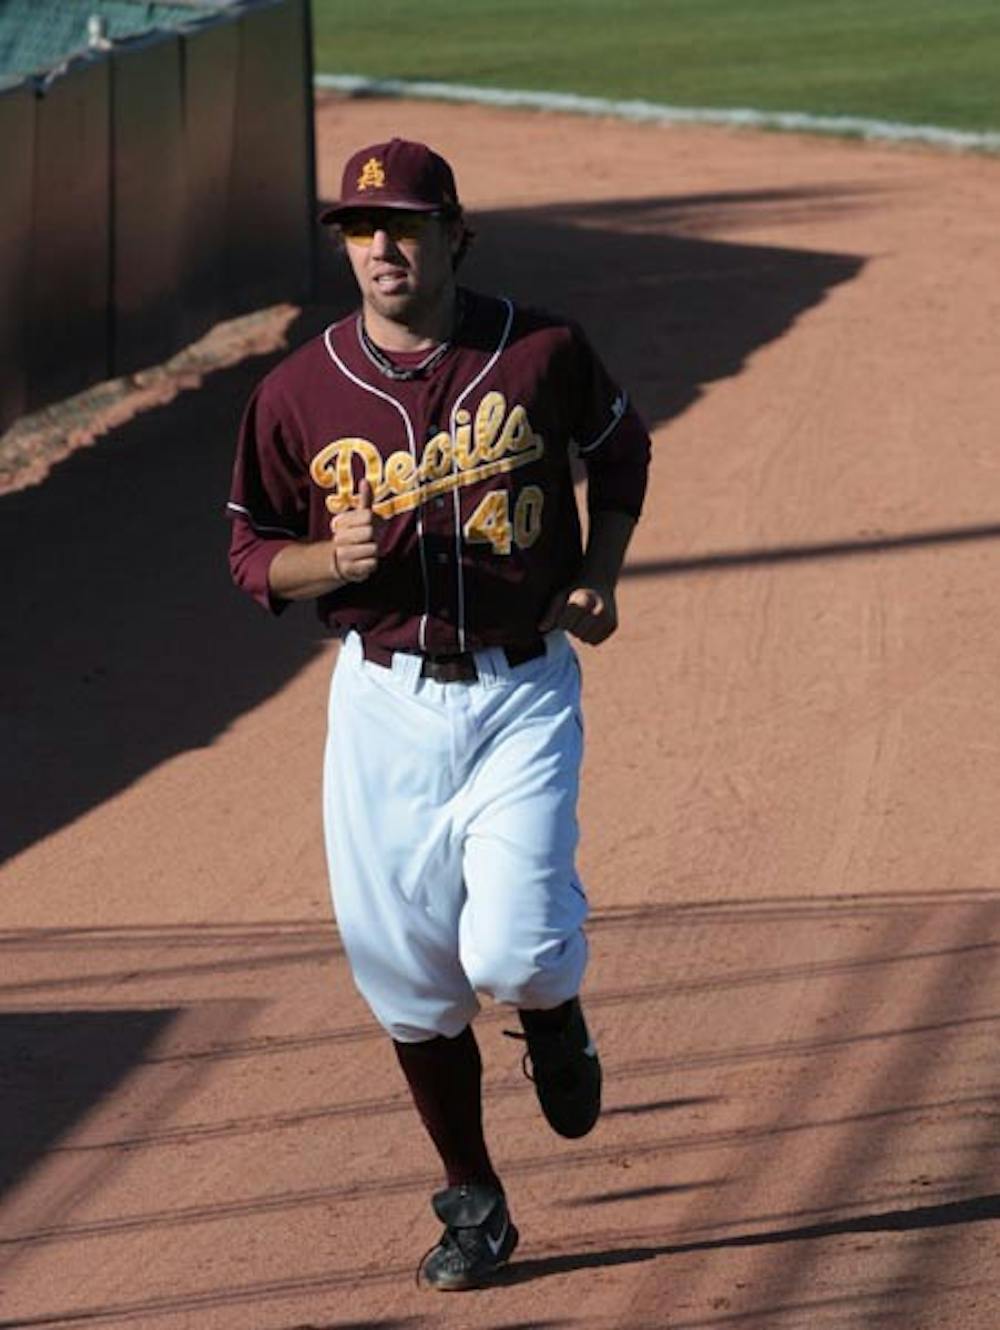 NEW YEAR EXCITEMENT: Junior pitcher Mitchell Lambson, shown jogging, is one of several returning players from the Pac-10 champion squad excited for the upcoming season. ASU coach Tim Esmay, coming off a 52-10 record in his first year at the helm, understands the winning expectations associated with his team, and the pressure that accompanies it. (Photo by Nick Kosmider)